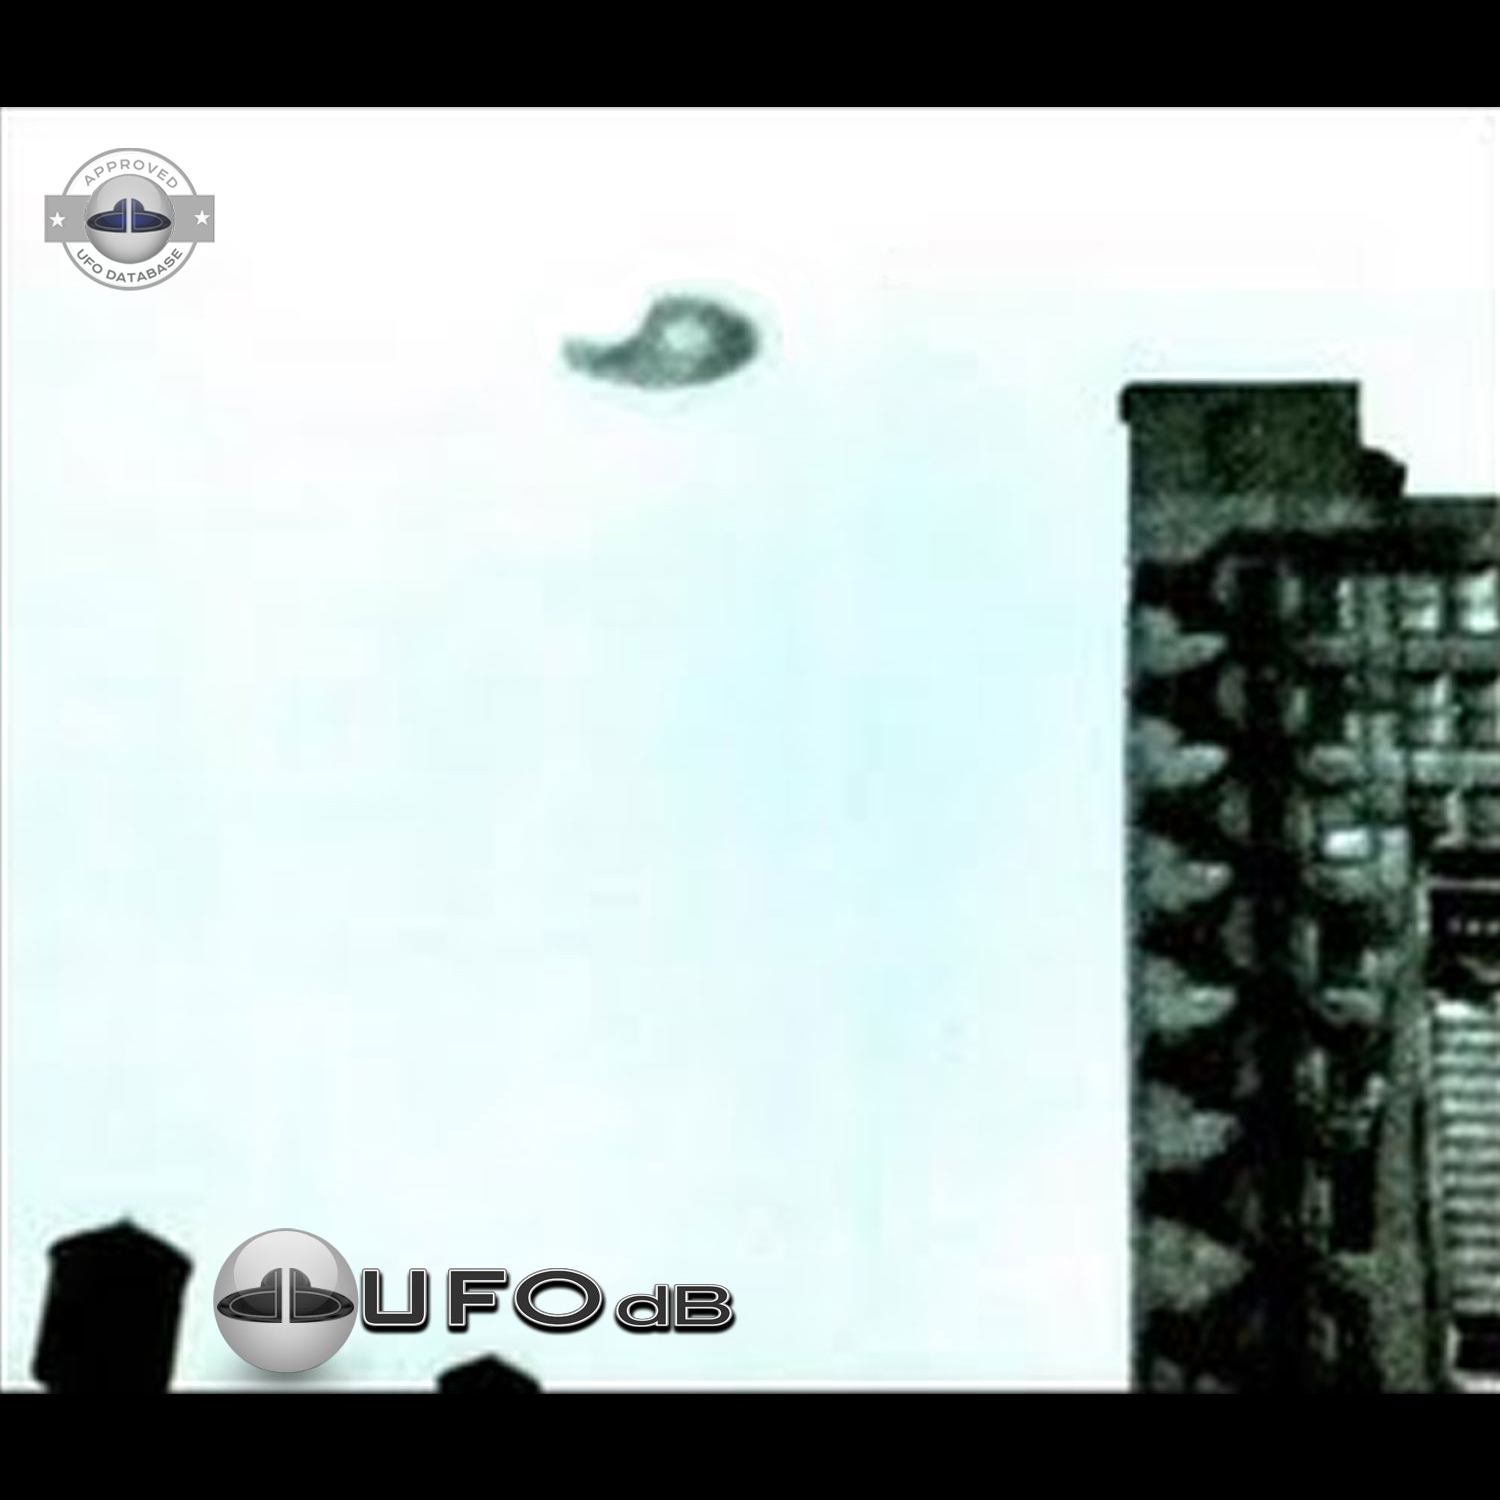 UFO picture was shot from the roof of an building in New York City UFO Picture #105-1